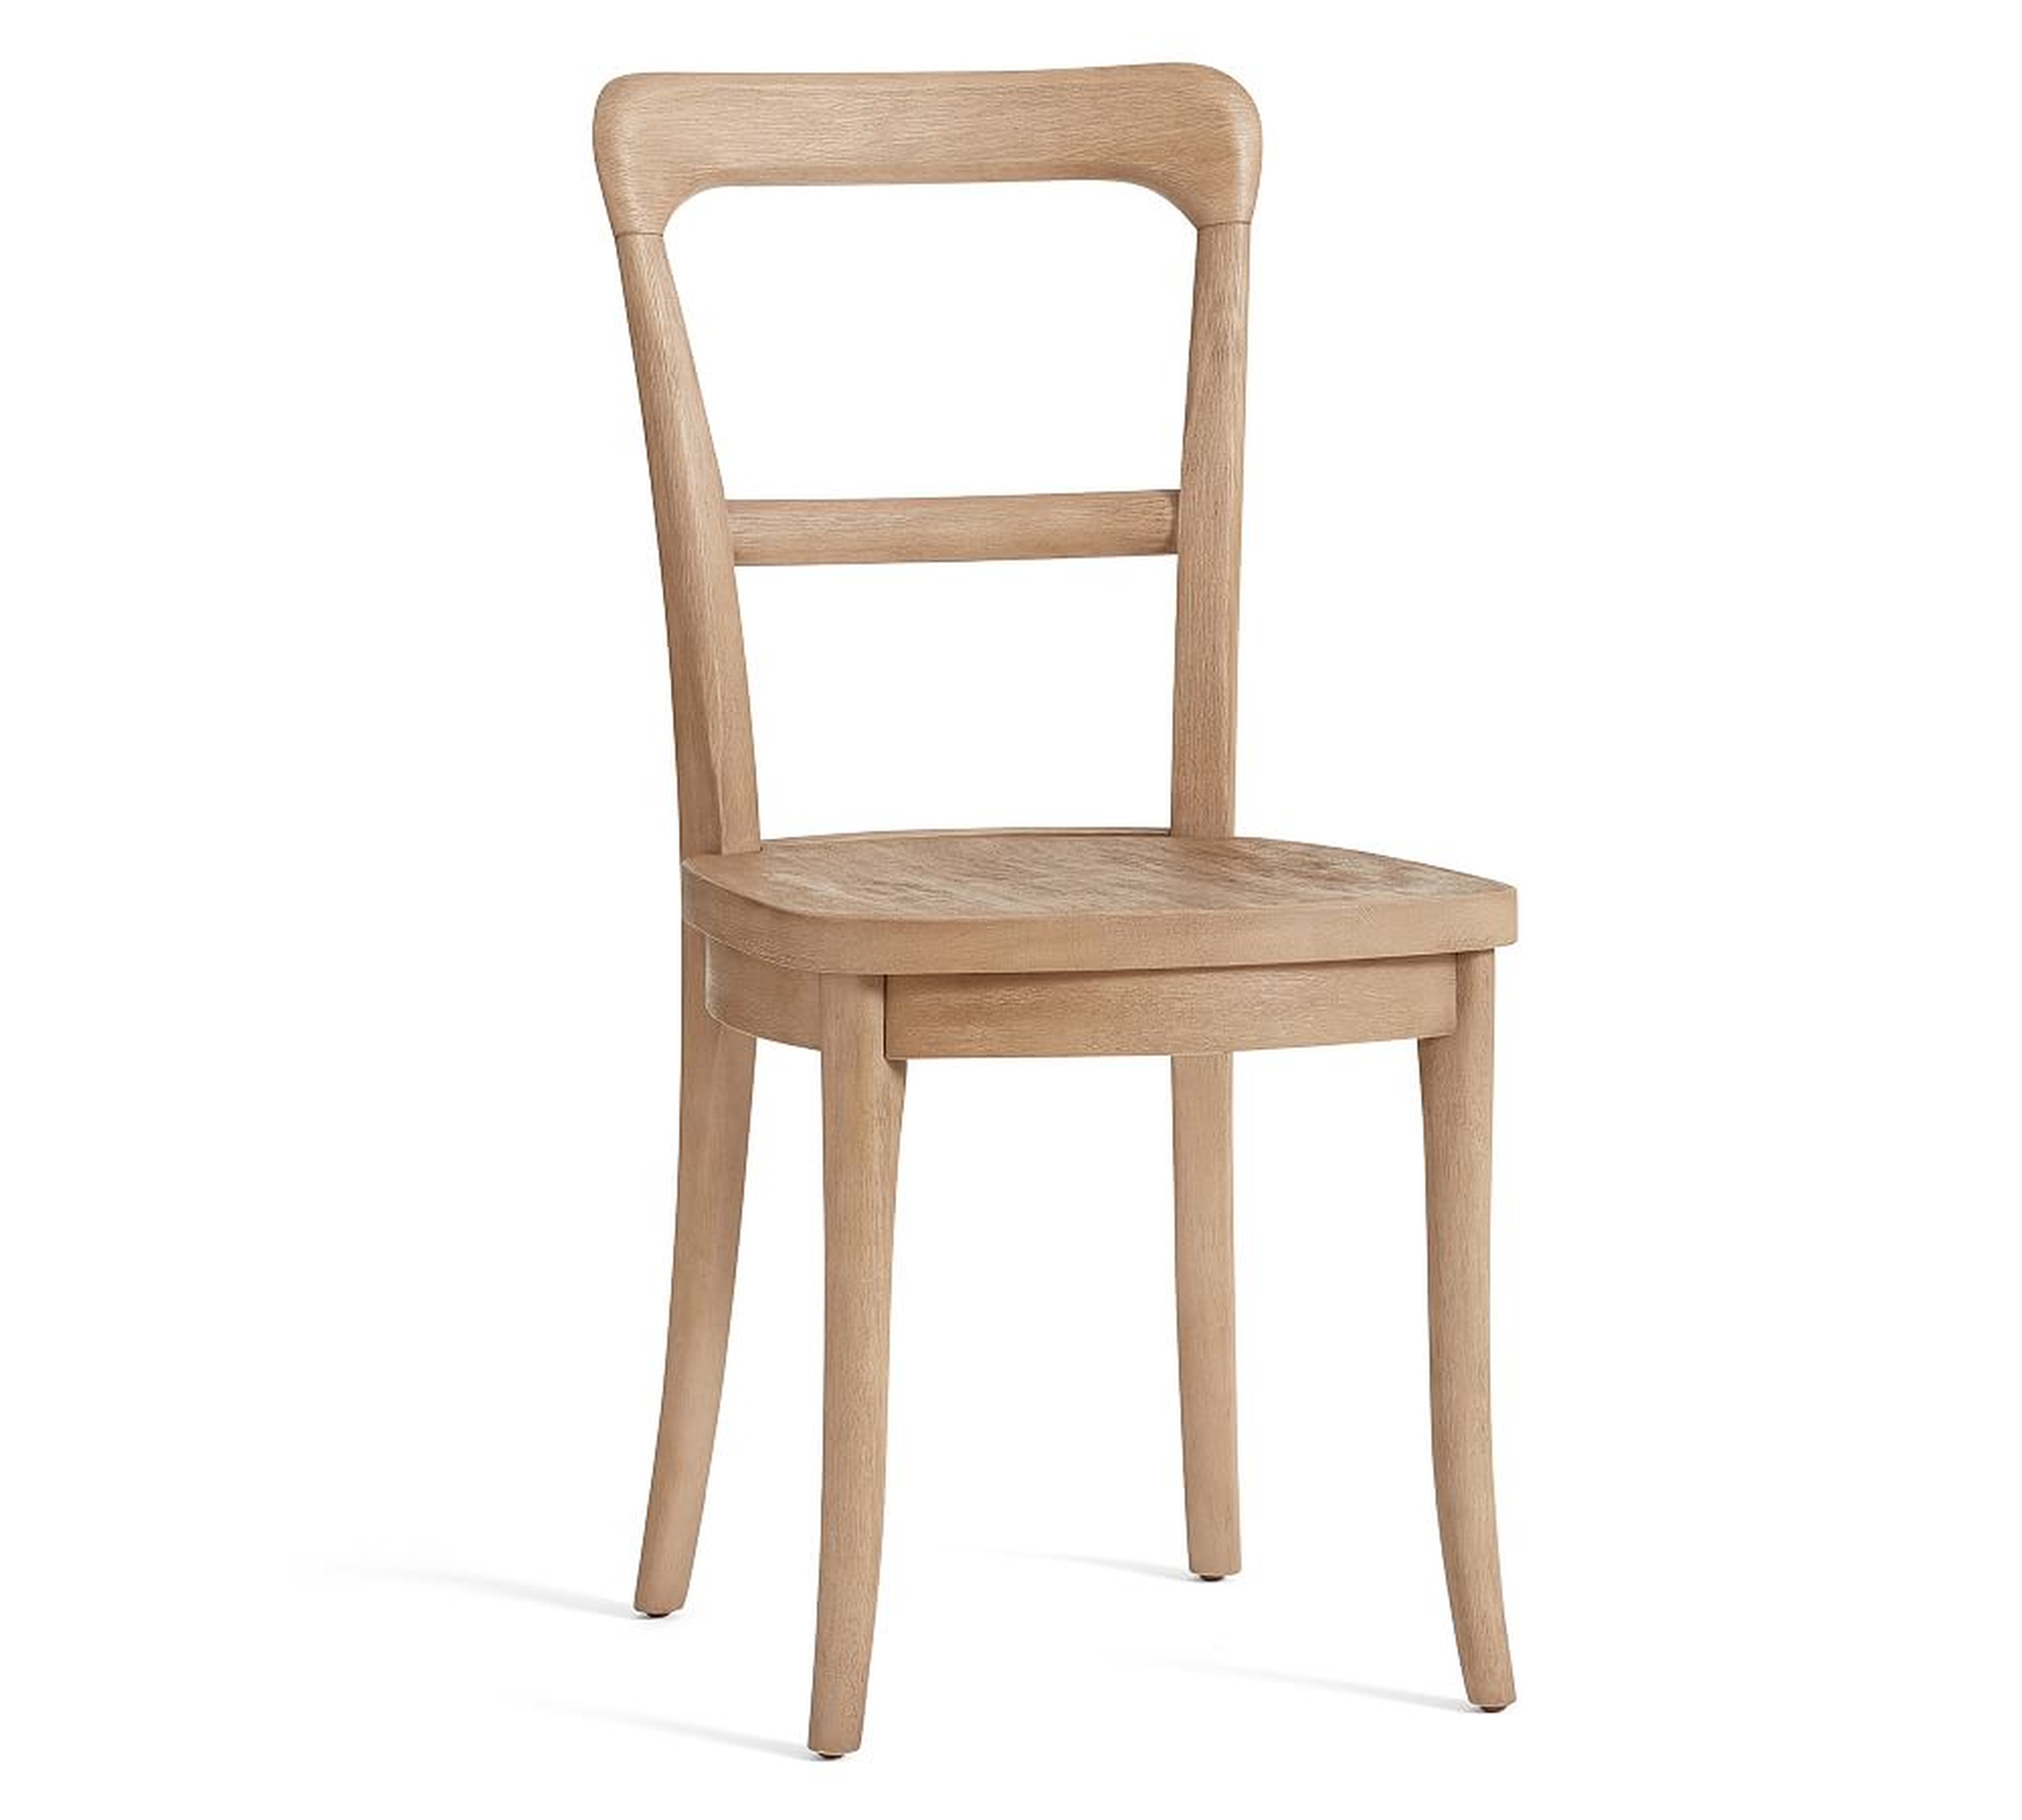 Cline Dining Chair - Pottery Barn